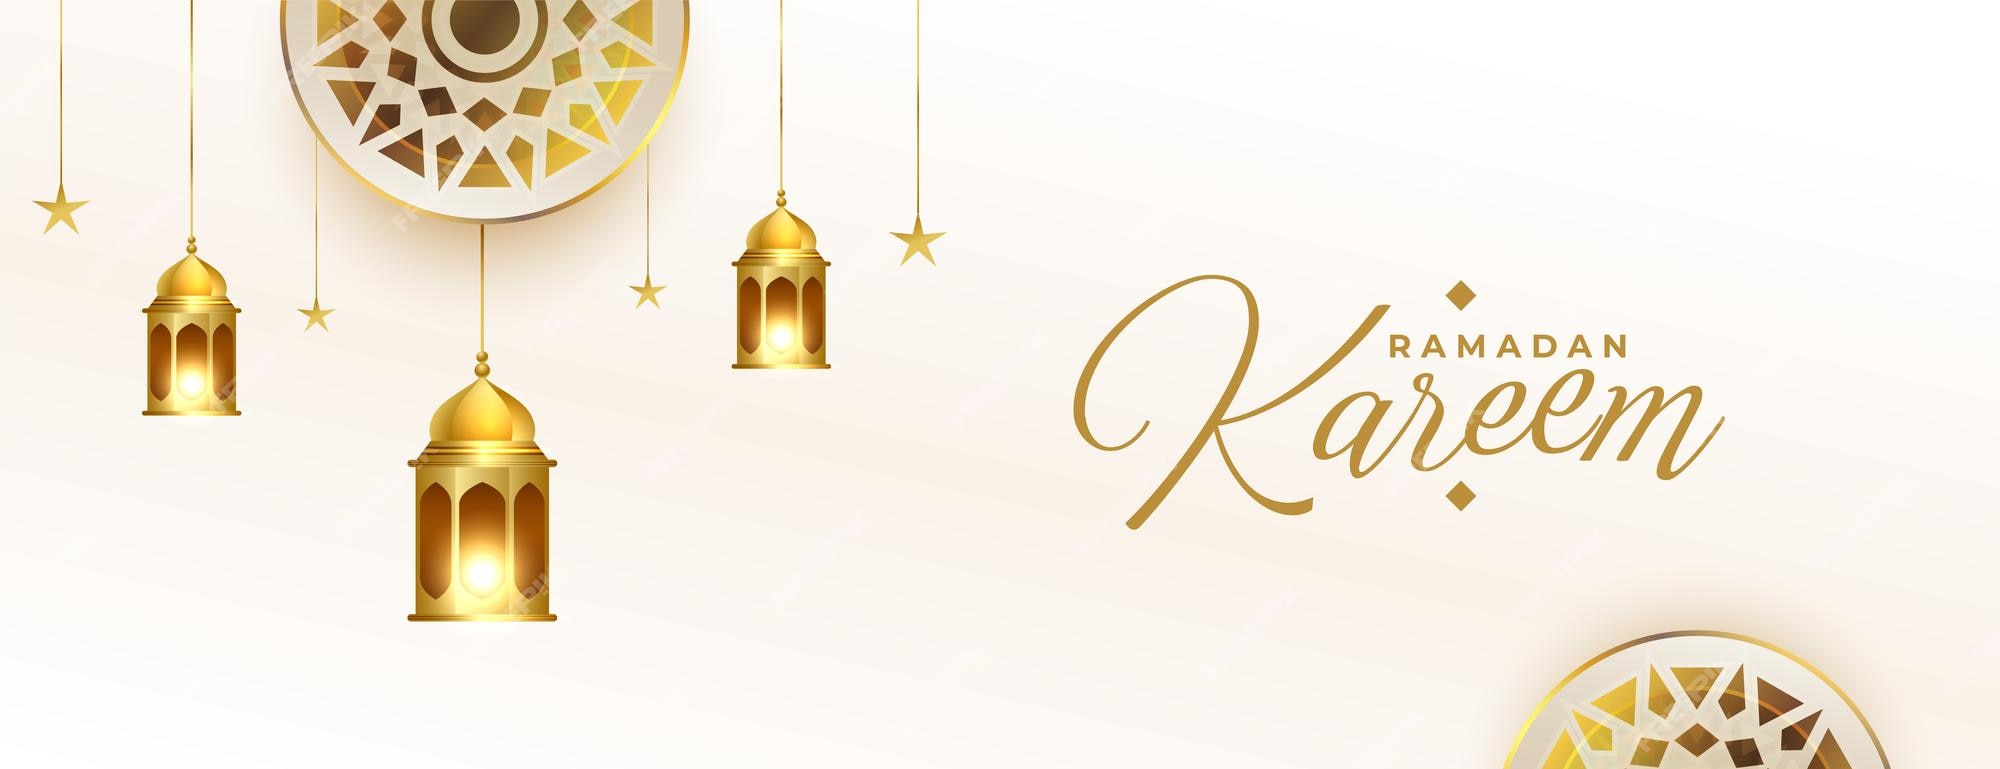 Free Vector | Peaceful ramadan wishes banner with golden lanterns ...